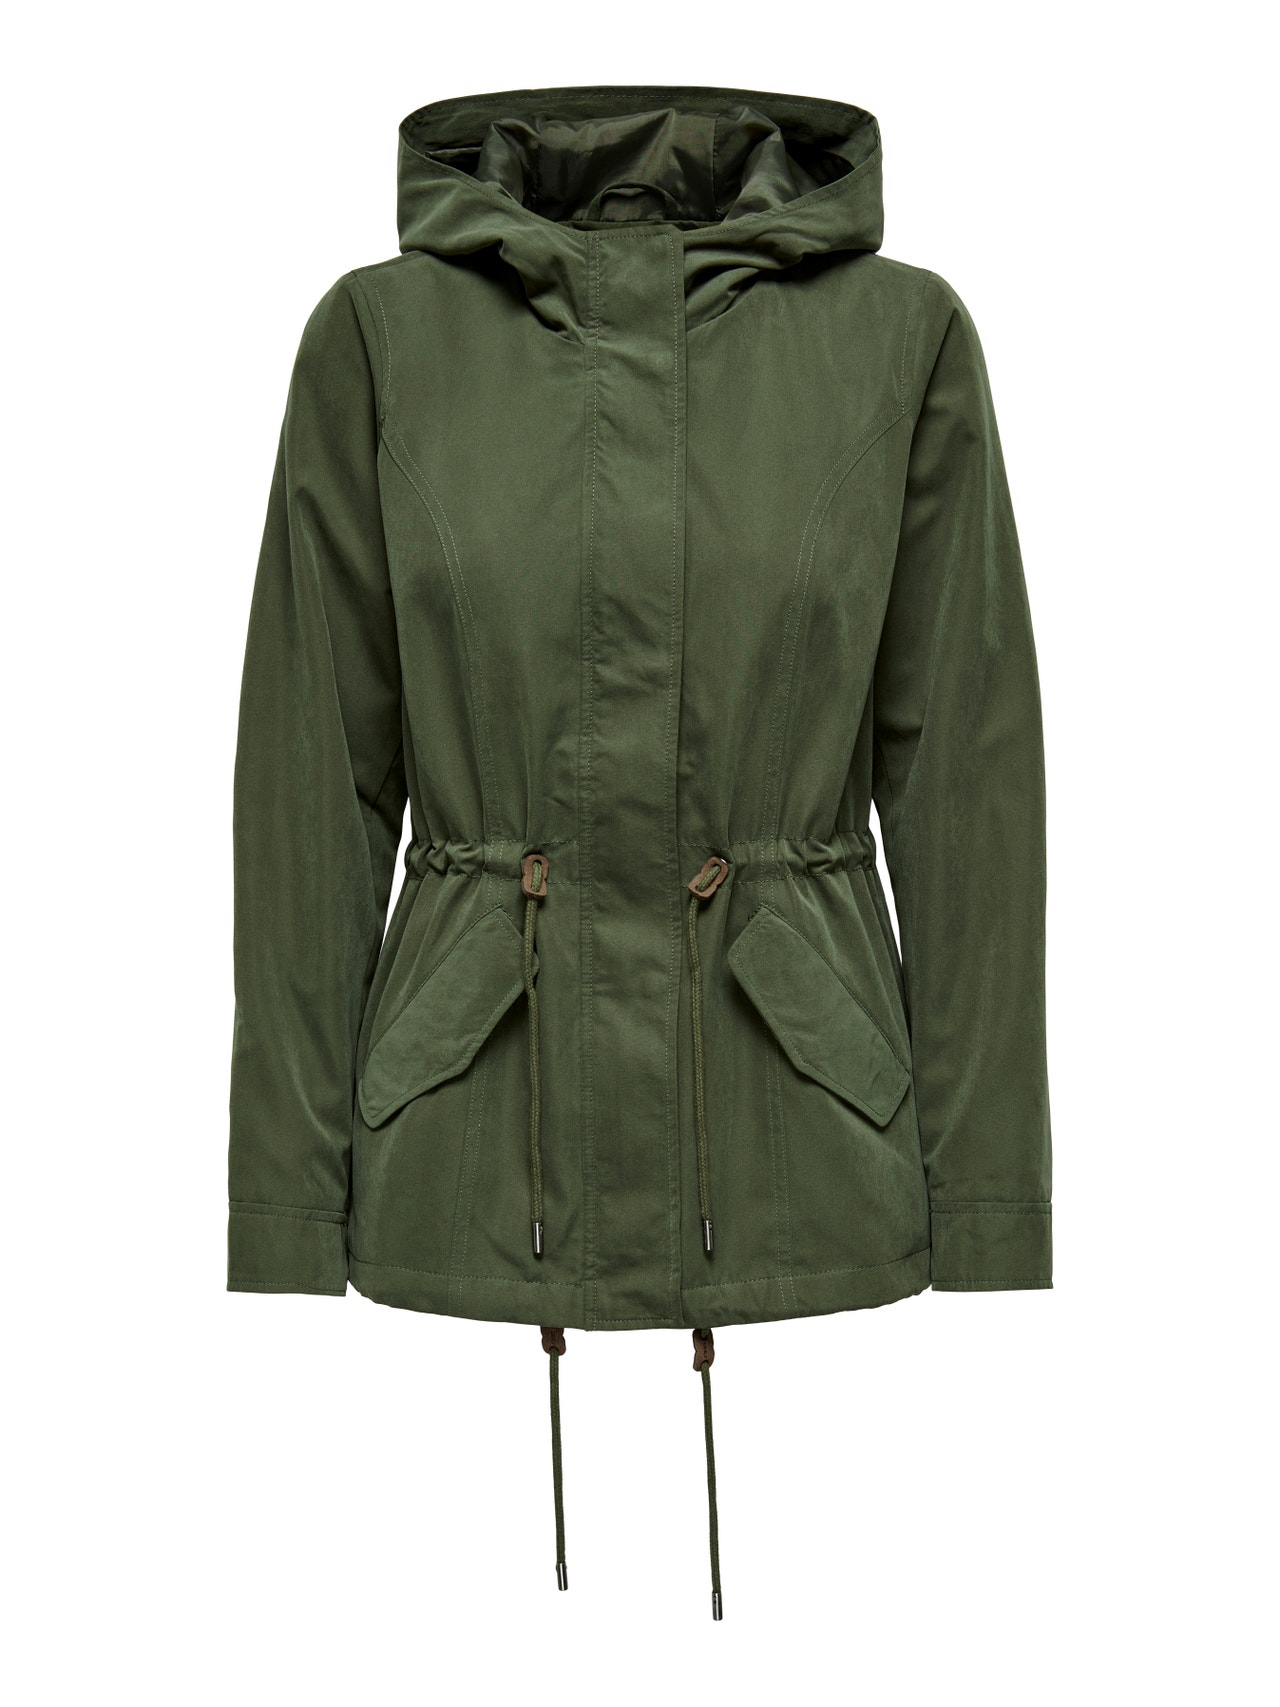 ONLY Solid color parka -Forest Night - 15293592